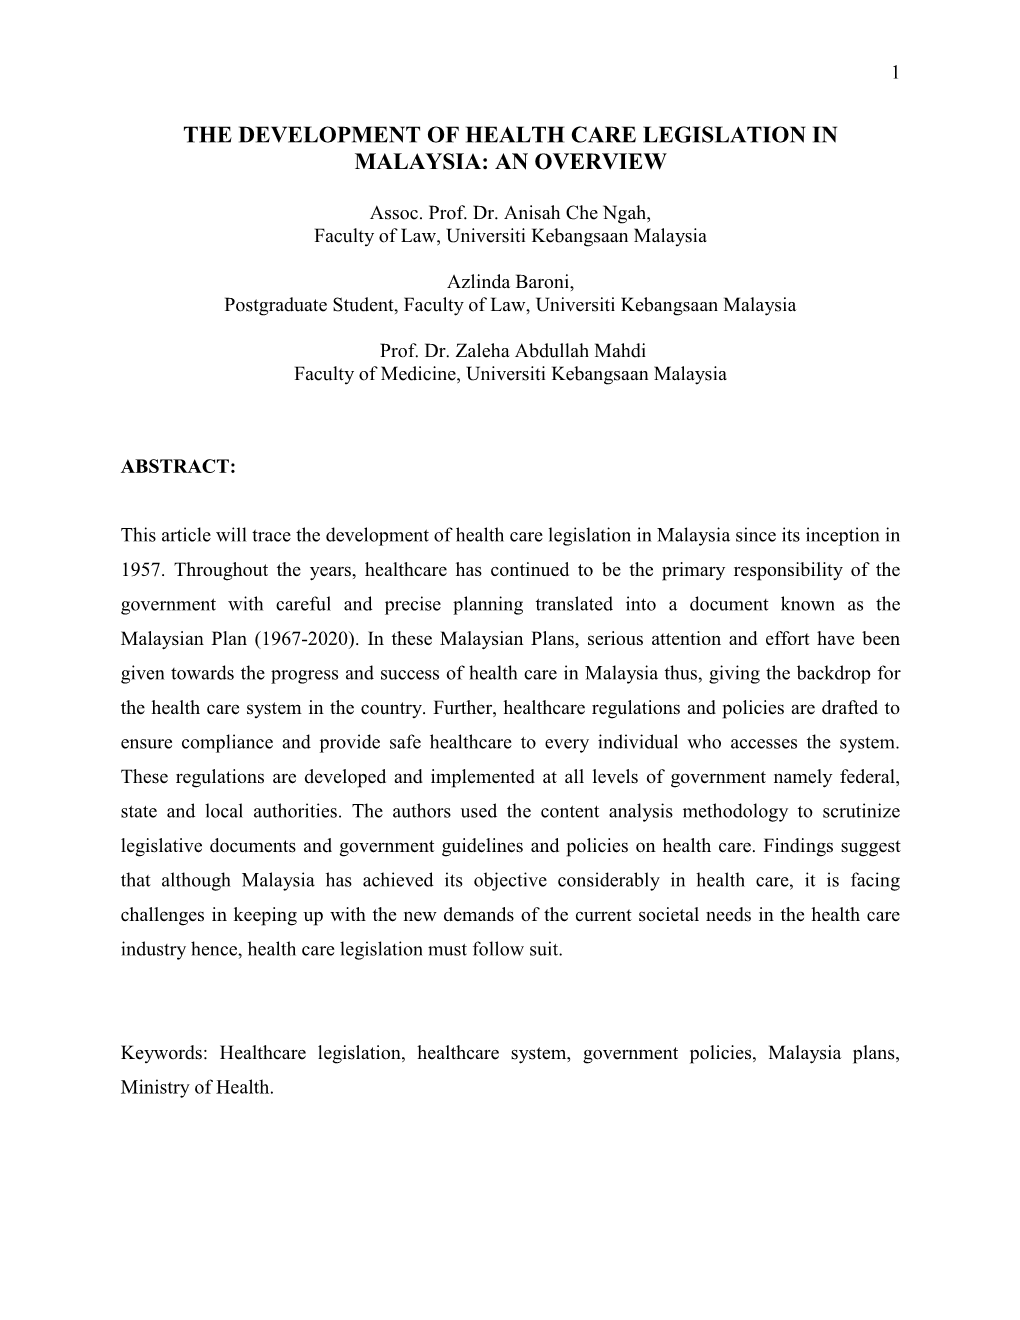 The Development of Health Care Legislation in Malaysia: an Overview